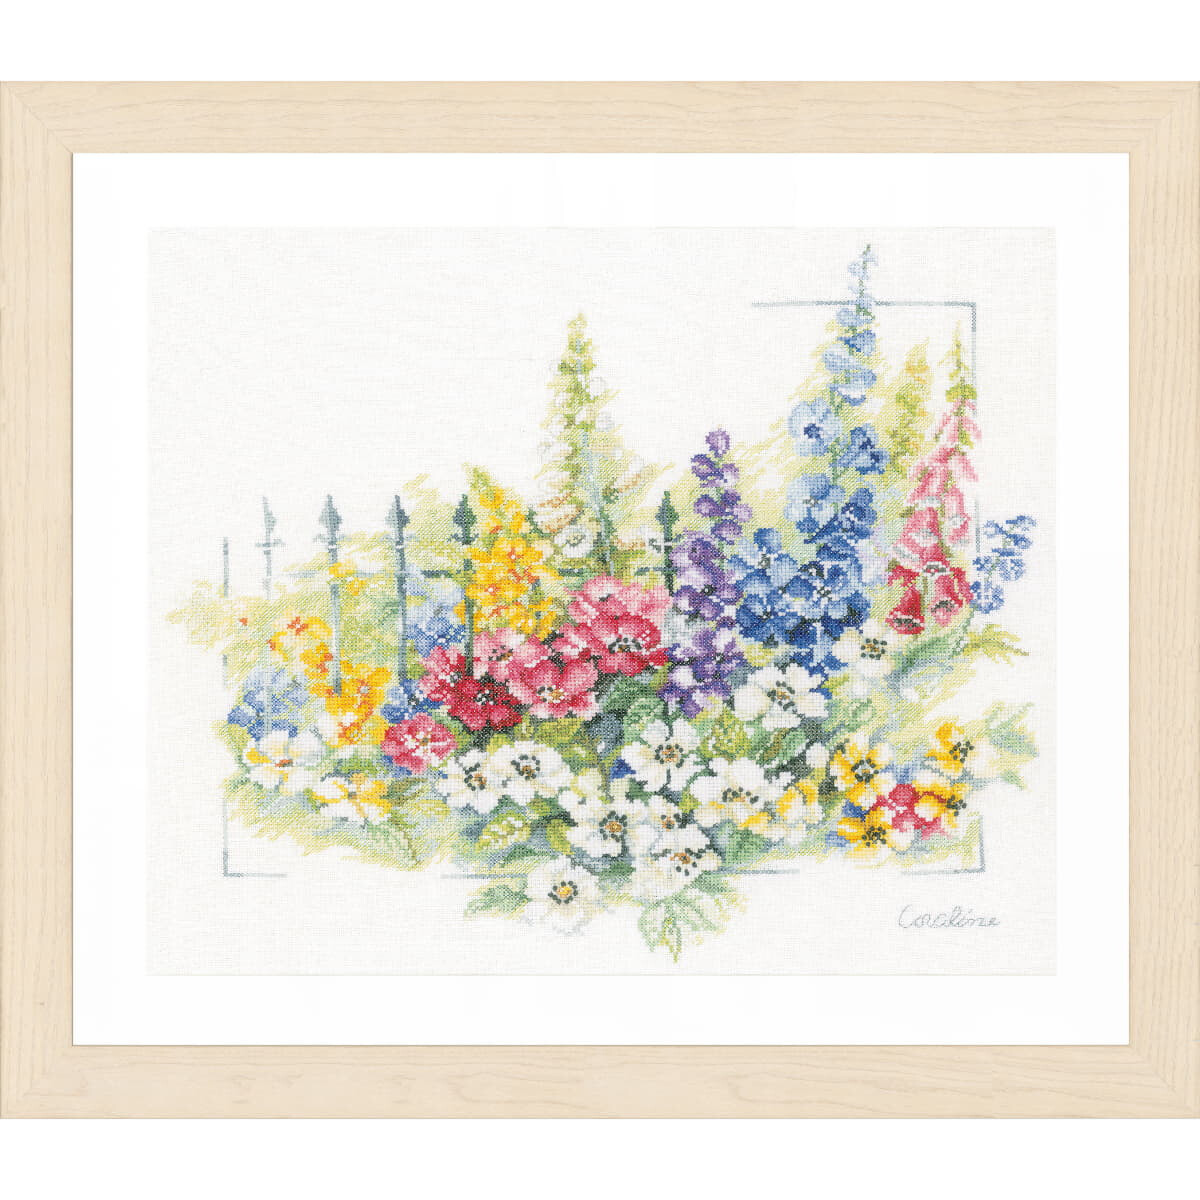 A detailed embroidery pack artwork from Lanarte features...